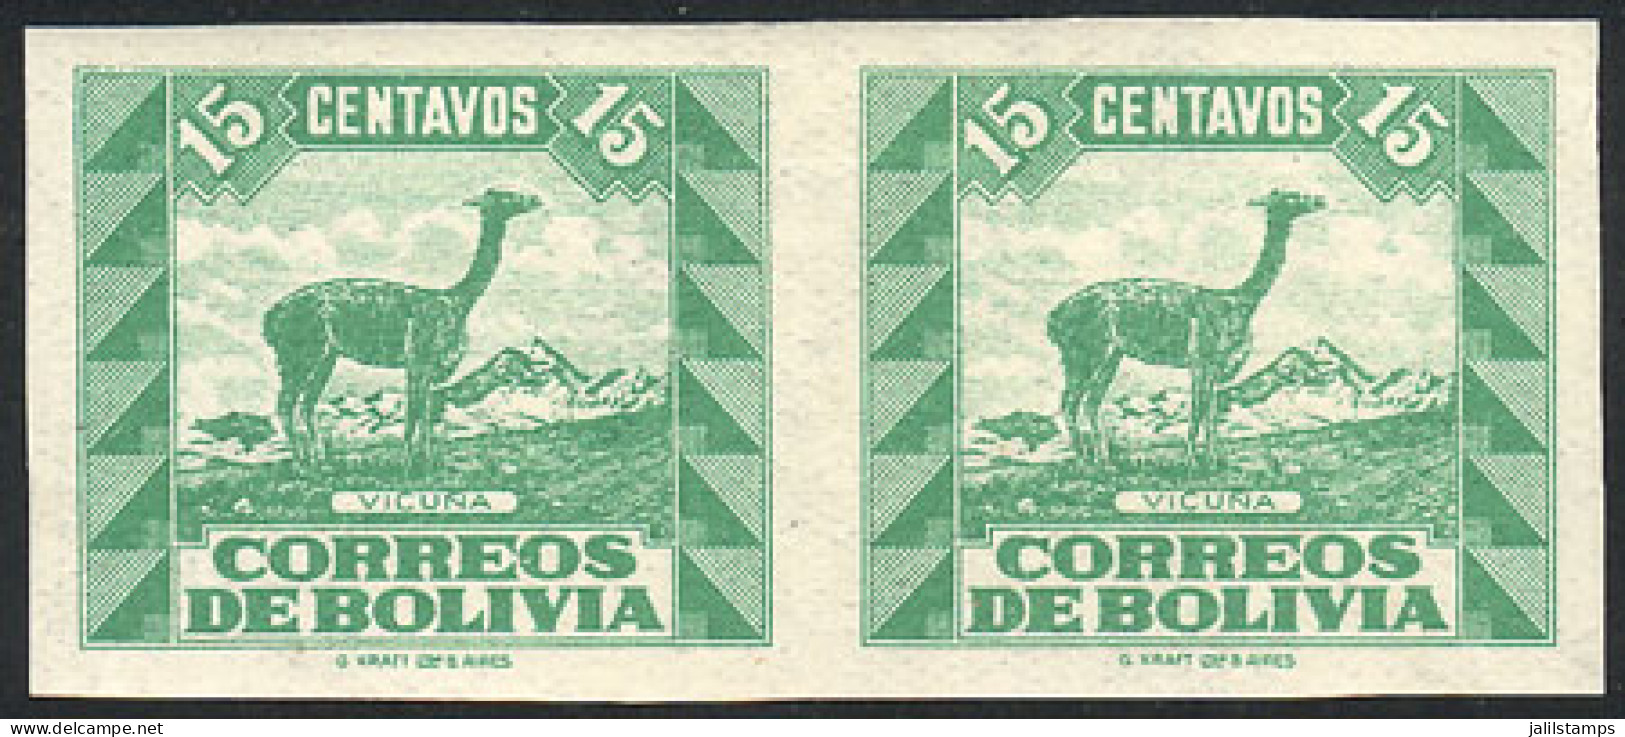 BOLIVIA: Sc.255, 1939 15c. Llama, IMPERFORATE PAIR, Mint Lightly Hinged, Very Fine Quality! - Bolivia